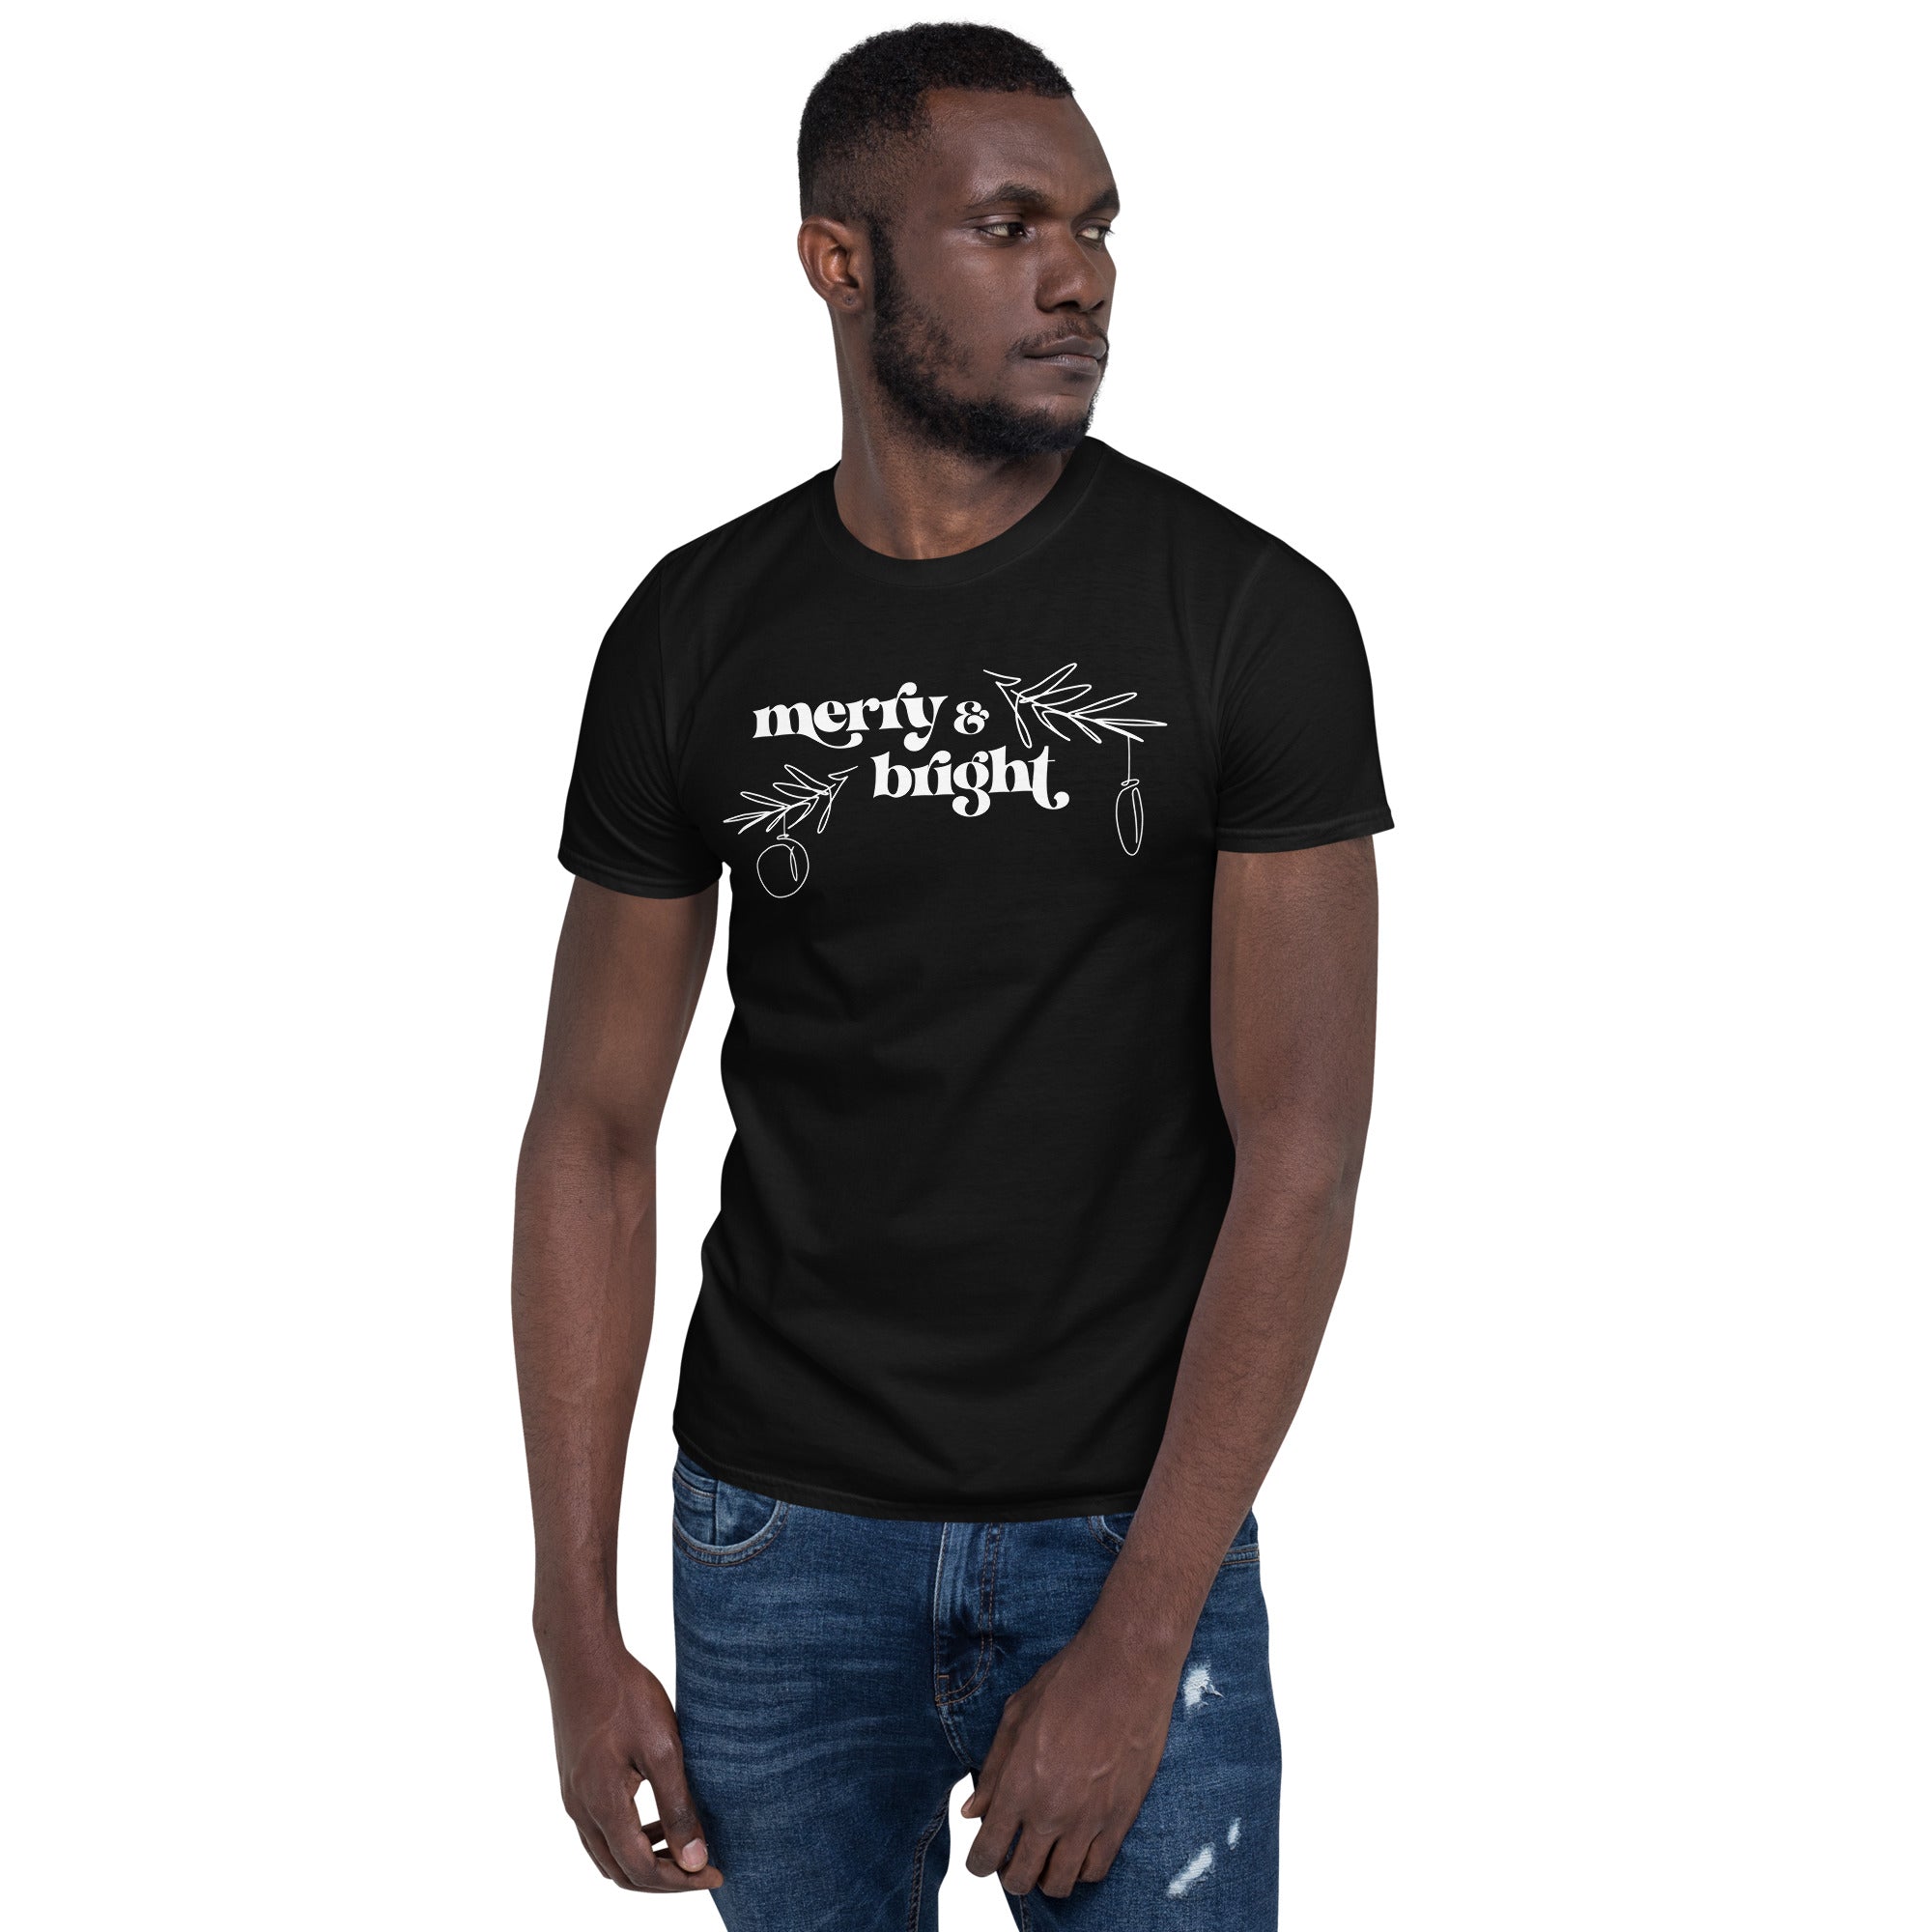 Merry And Bright - Short-Sleeve Unisex T-Shirt